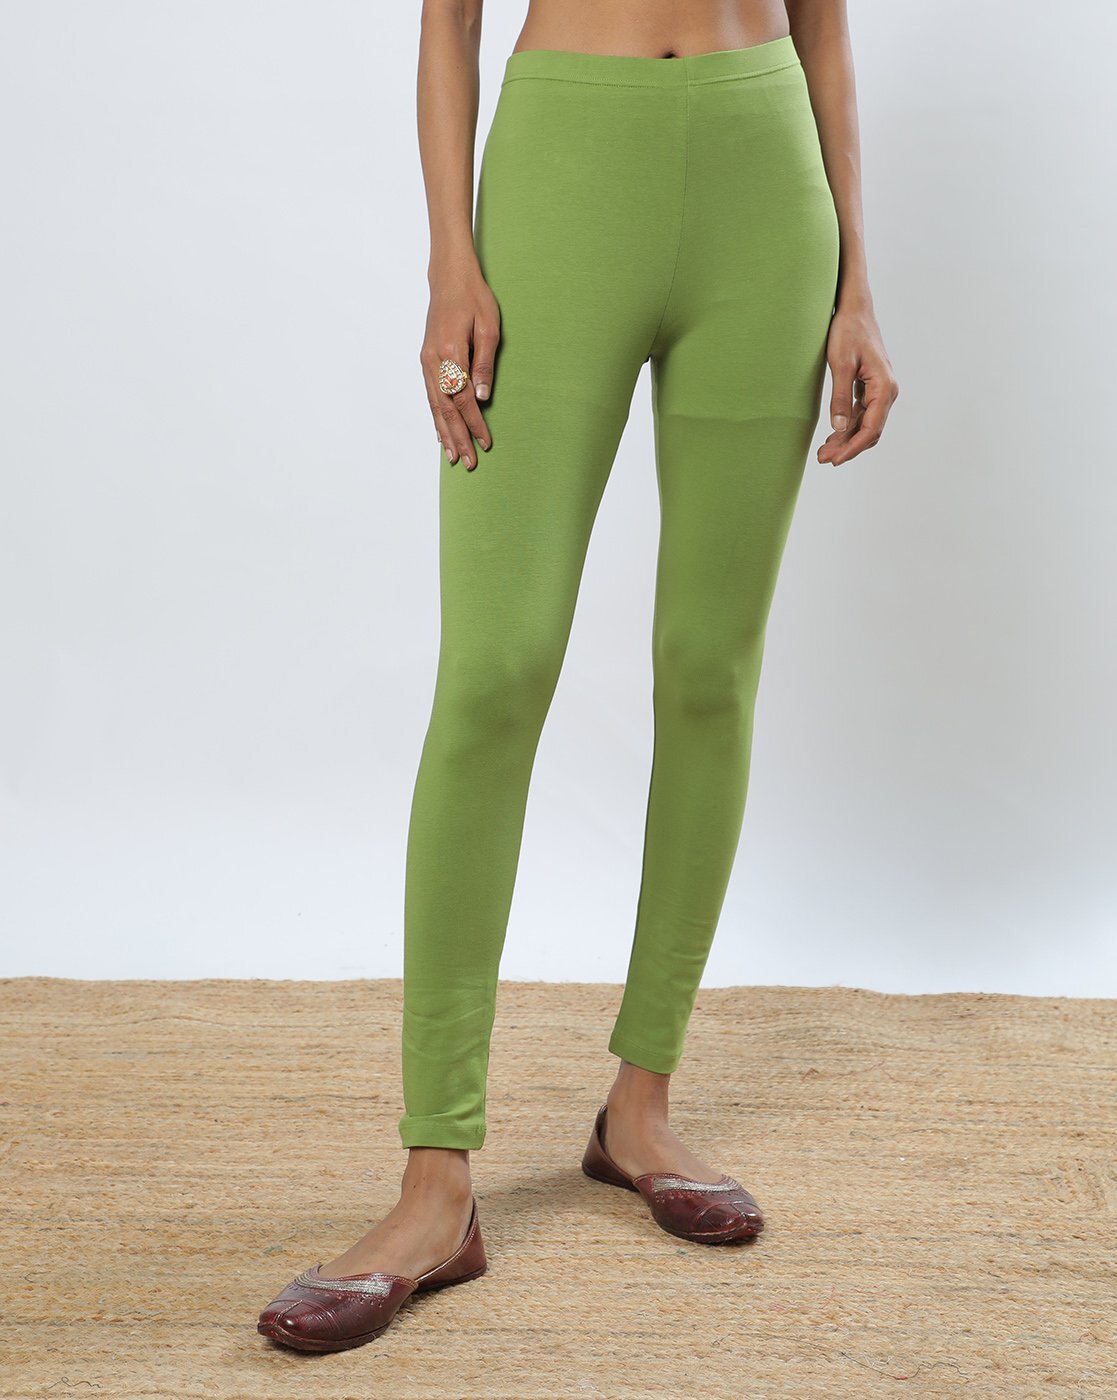 Buy Activewear Ankle Length Tights in Sage Green Online India, Best Prices,  COD - Clovia - AB0042P11